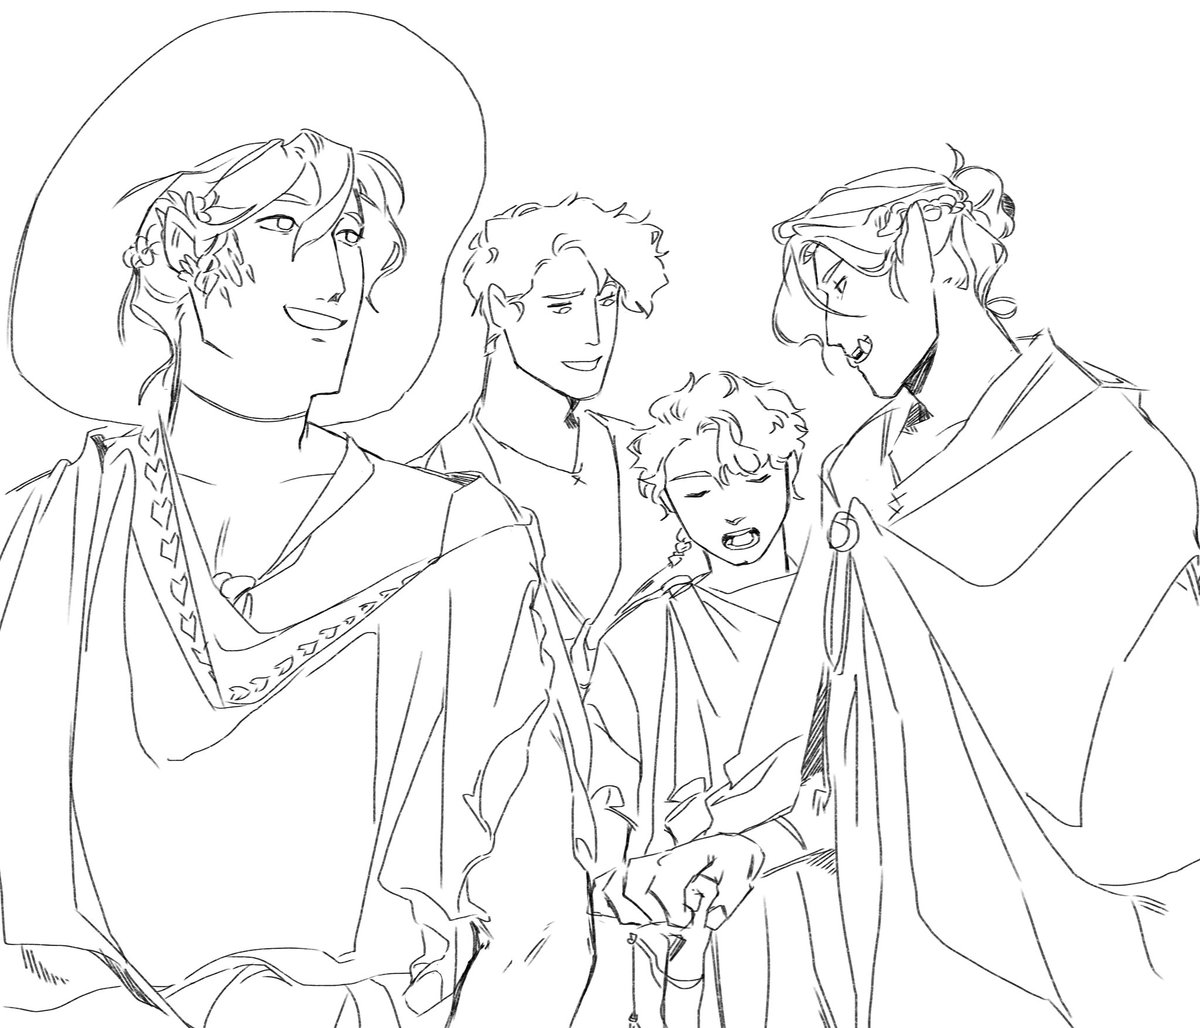 I adore this line-work. I wnat to draw some ancient Greek attires but I don't know if these are accurate. Can anyone give me advice while I am revising and coloring this? (lil tag: #sbifanart )